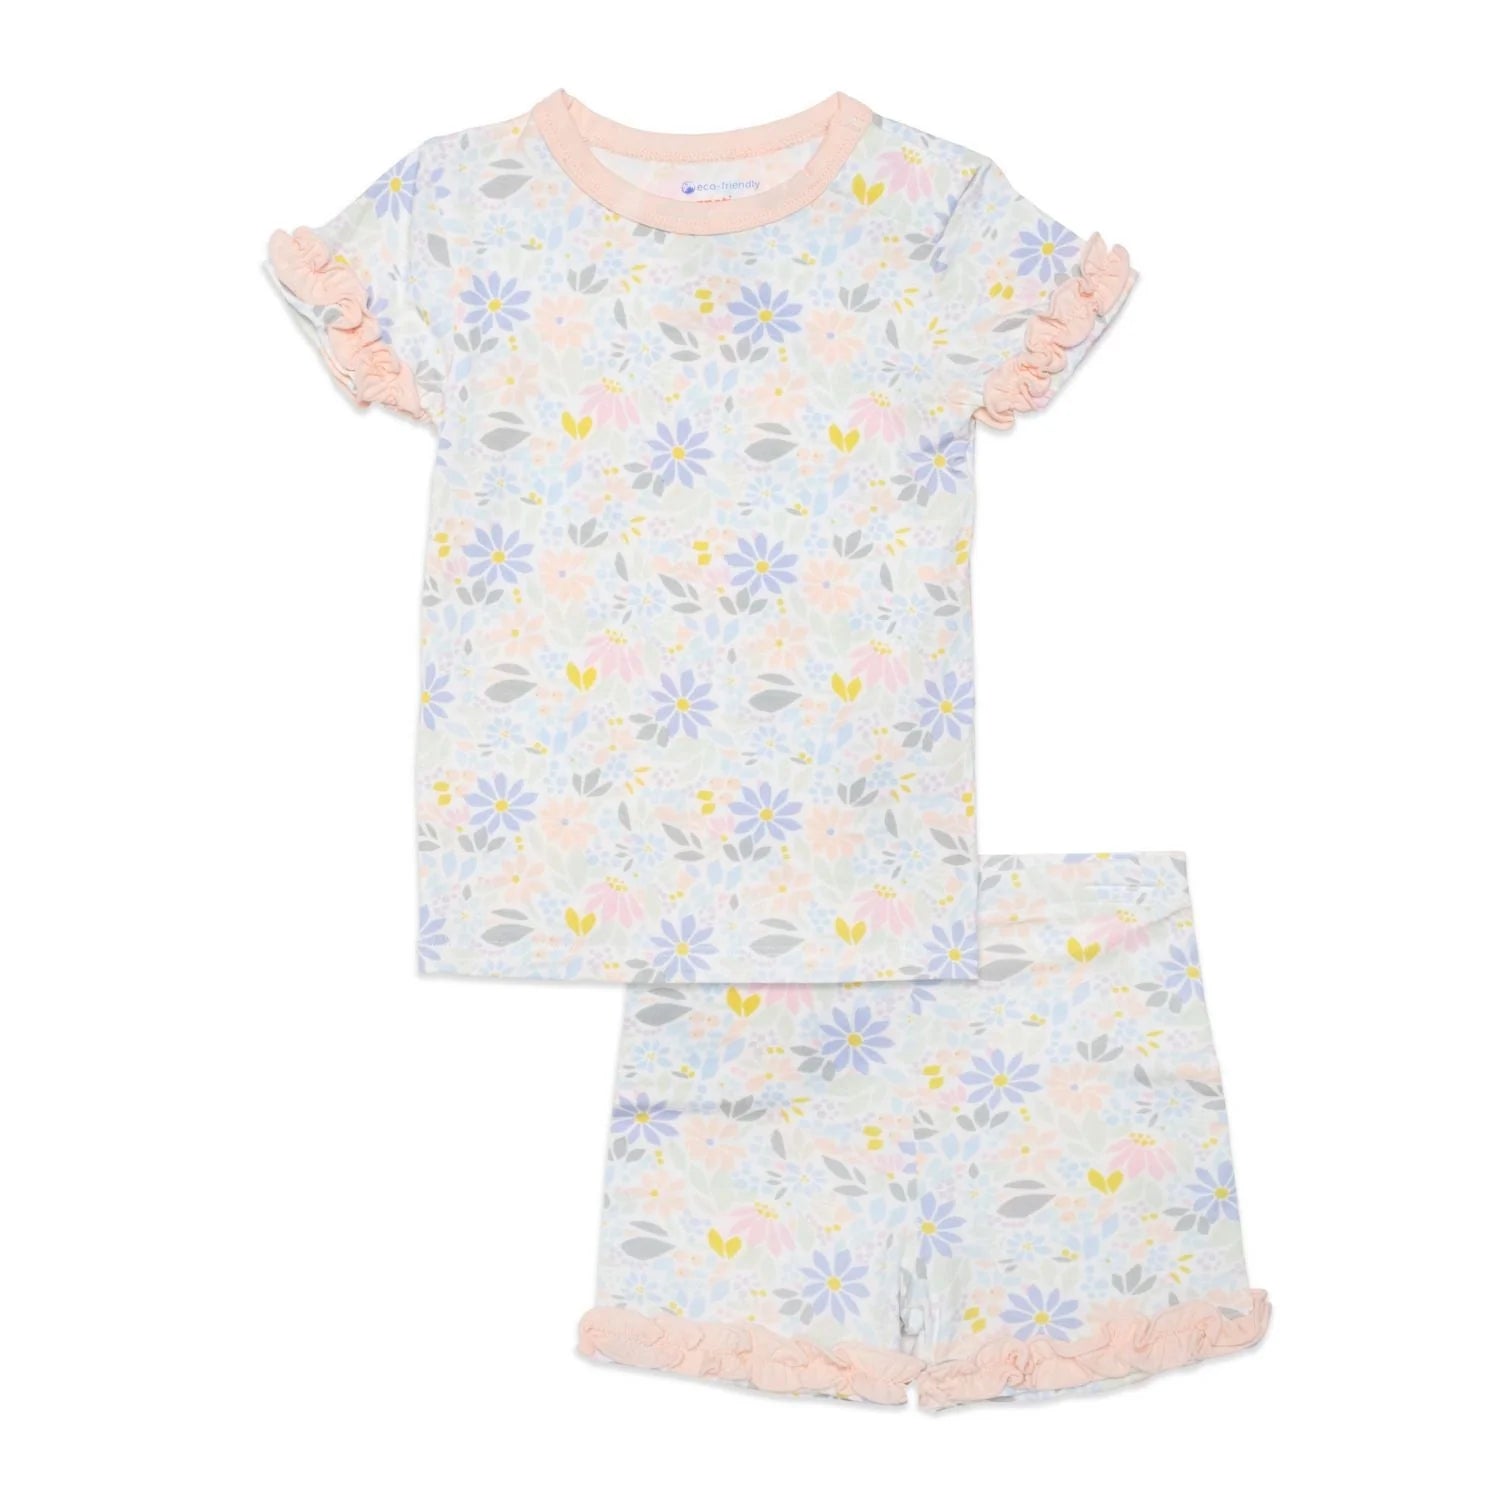 Magnetic Me Modal No Drama Magnetic Me Pajama Ruffled Shortie Set / Darby